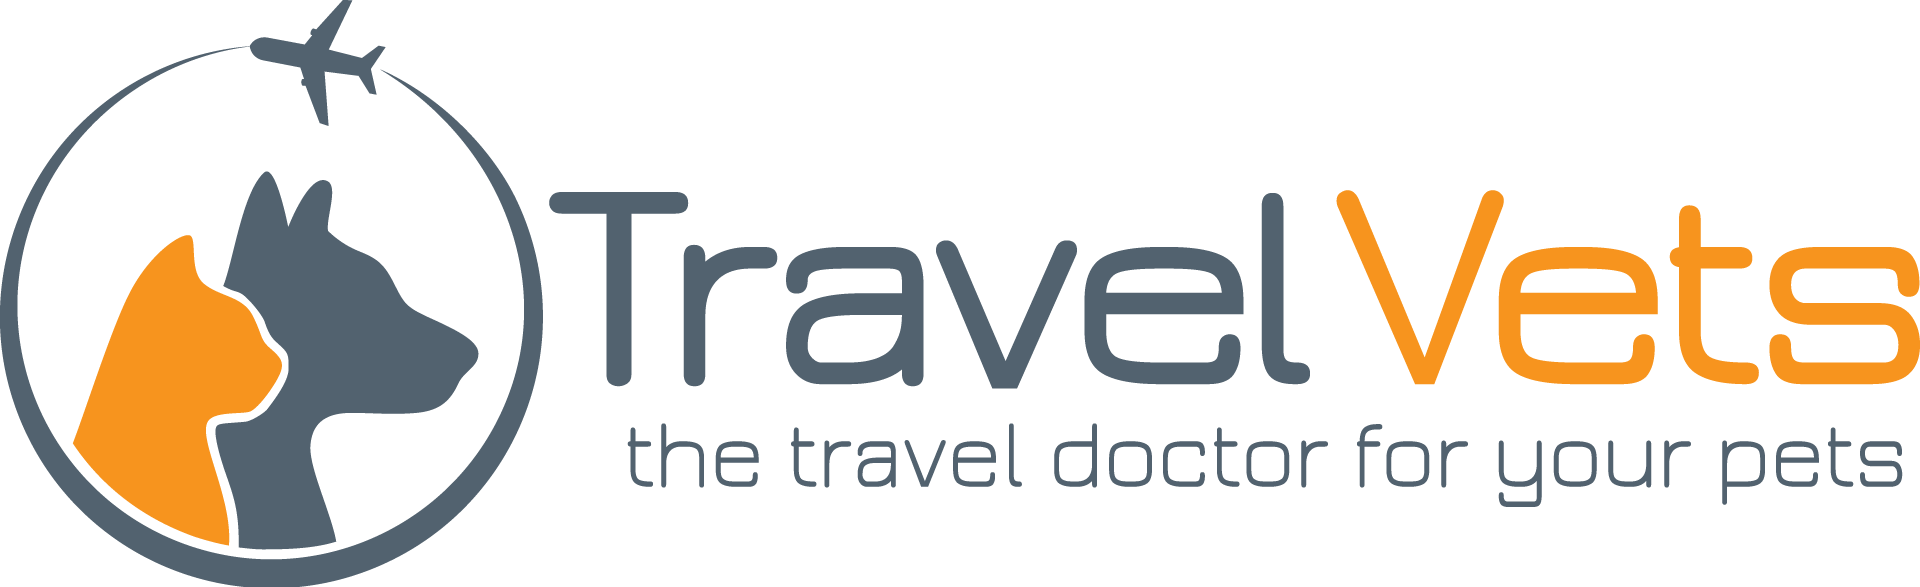 Travel Vets... the travel doctor for your pets. Logo